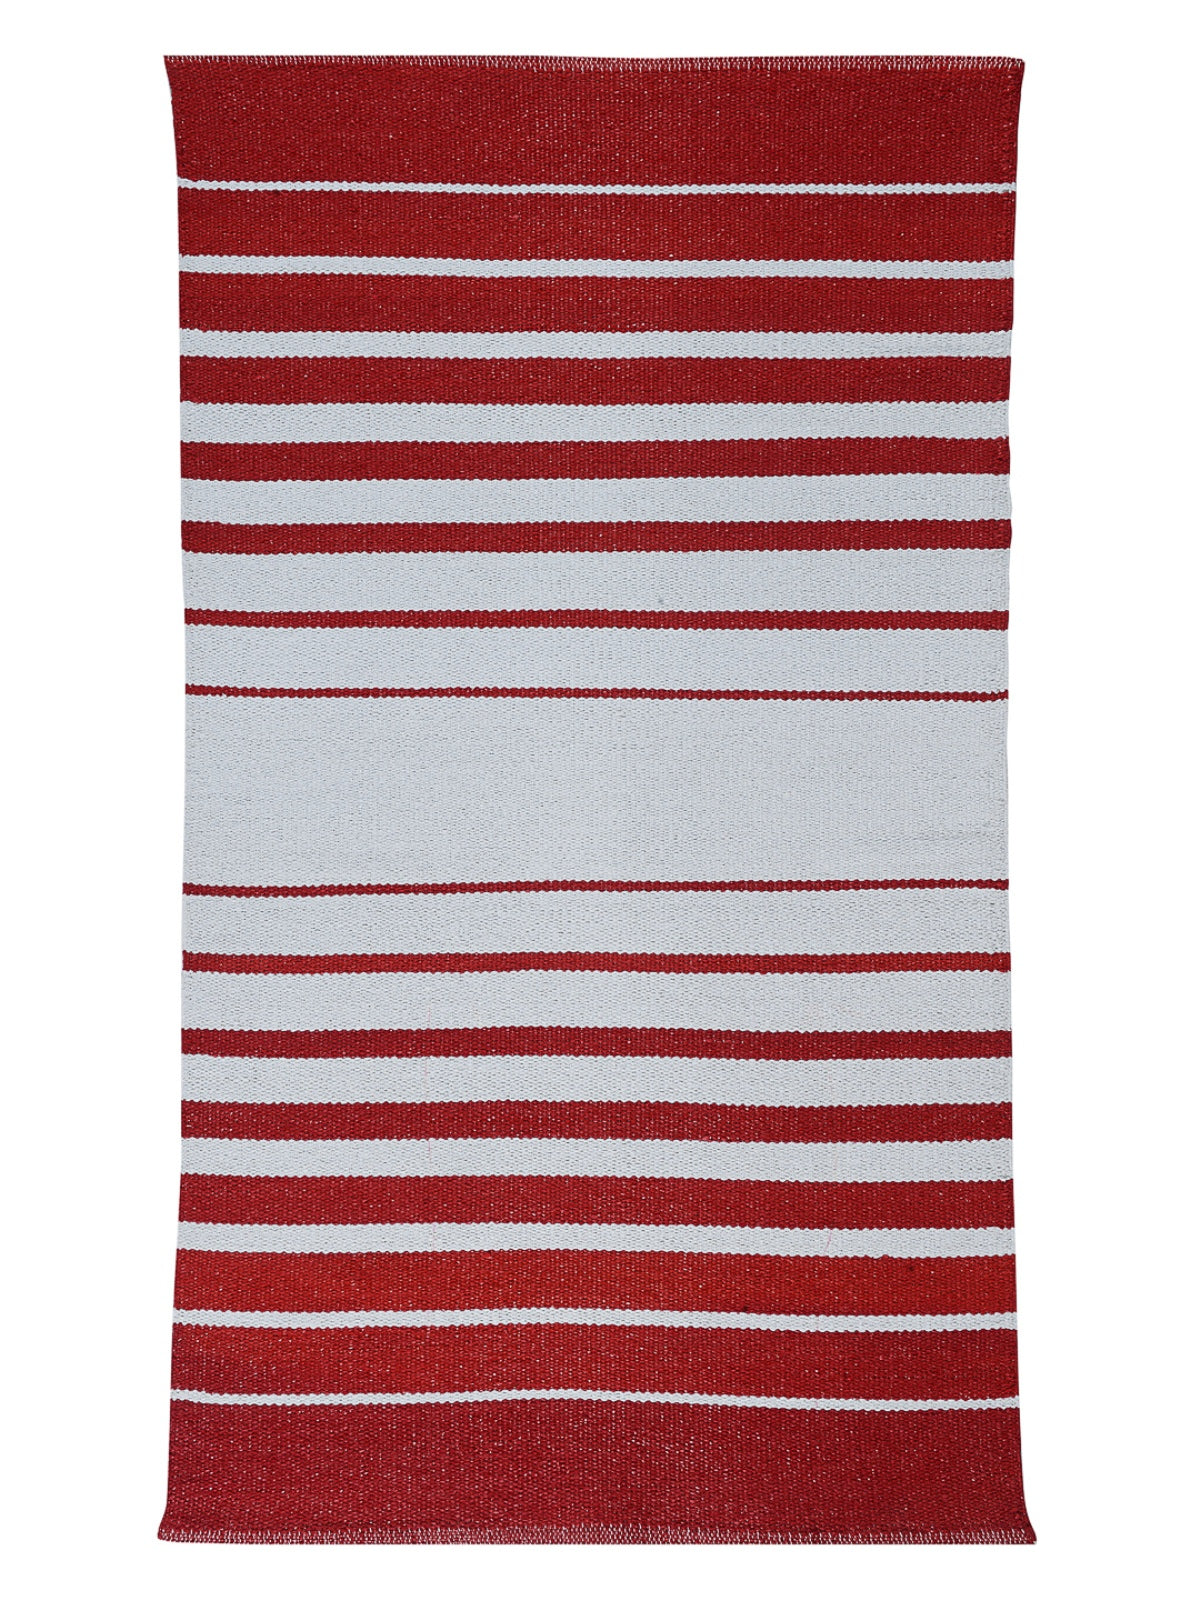 Red & White 3 ft x 5 ft Stripes Patterned Dhurrie